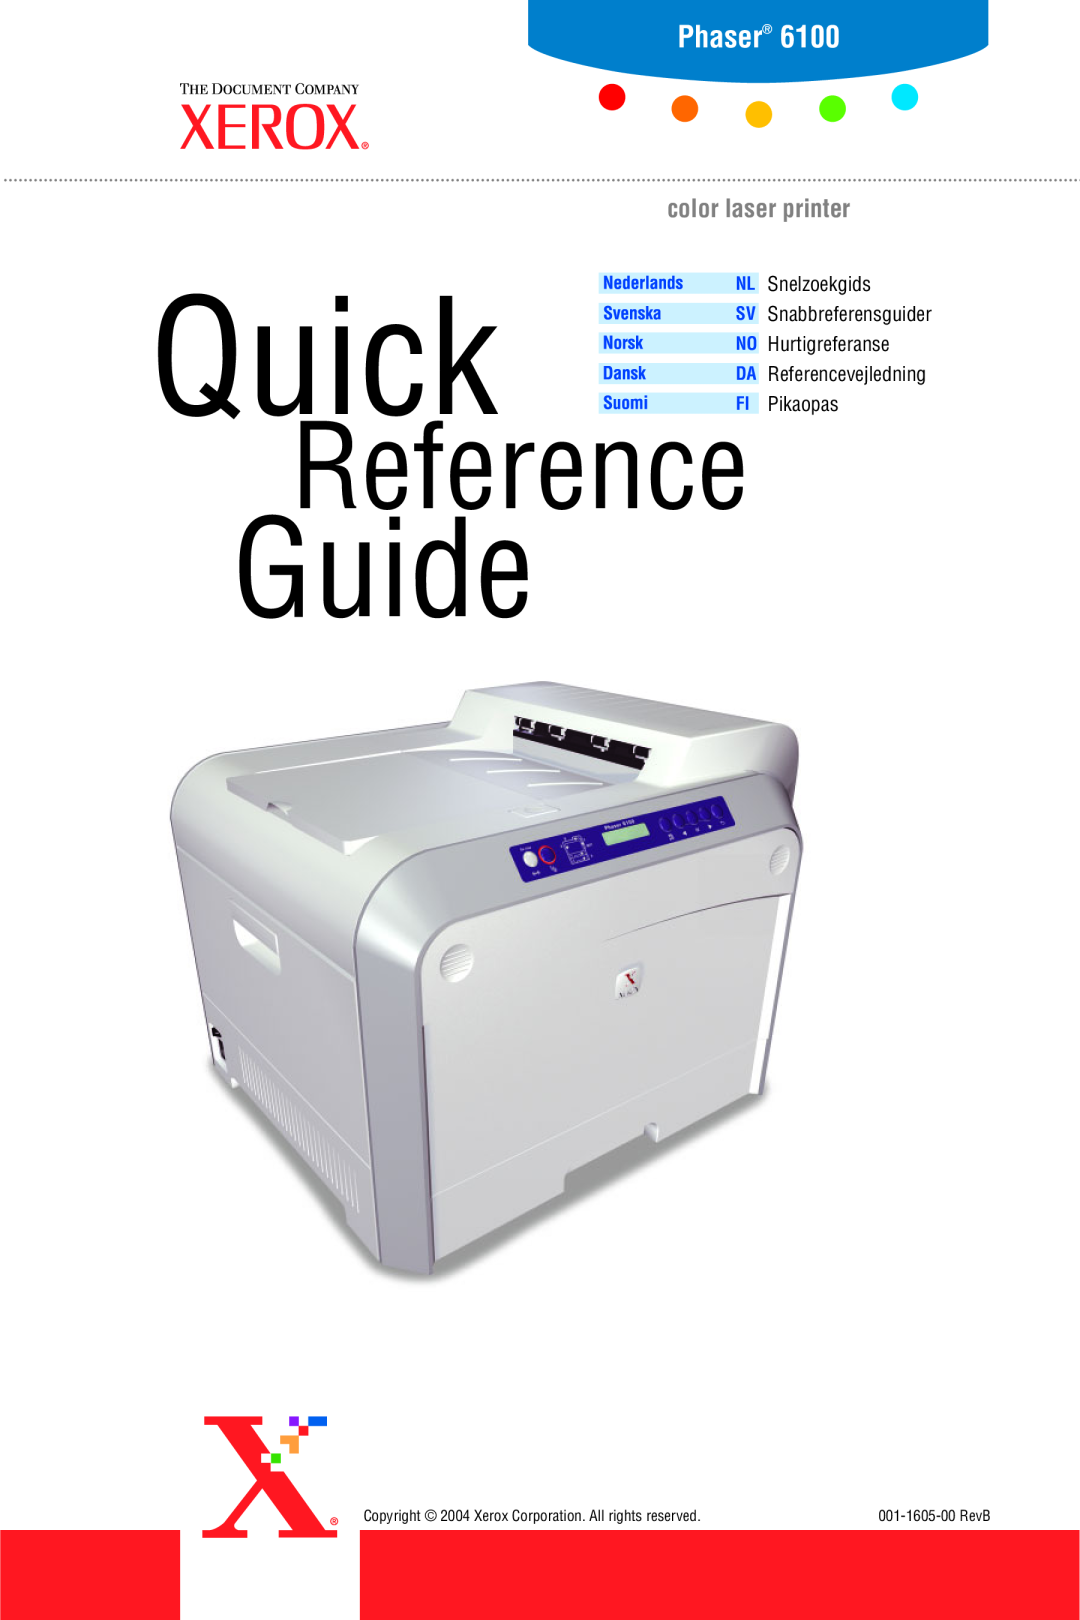 Xerox Phaser 6100 manual Quick, Guide, Reference, color laser printer, RevB 